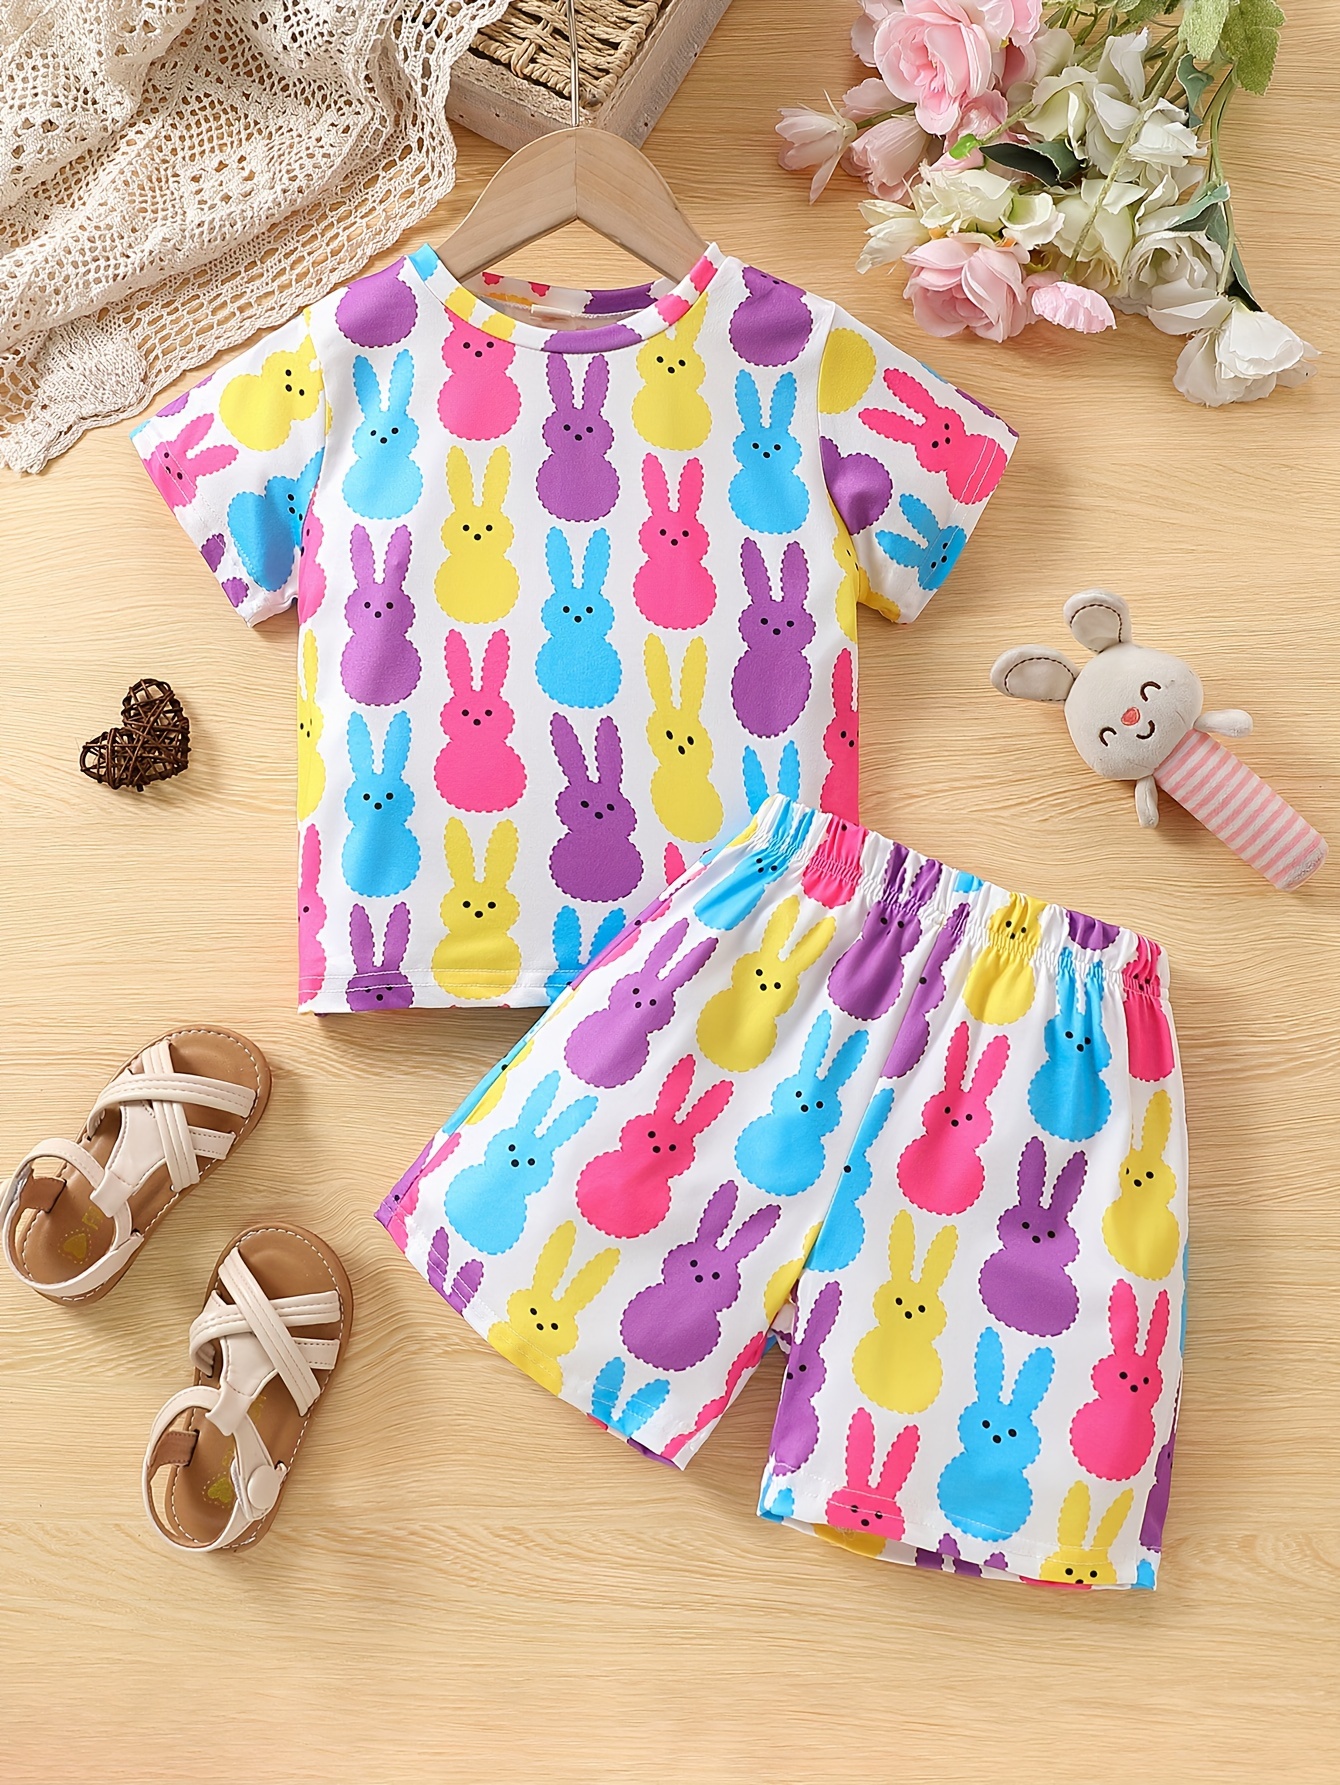 Cute Dress For Teens Girl Two Piece Set Bunny Prints Casual Cotton